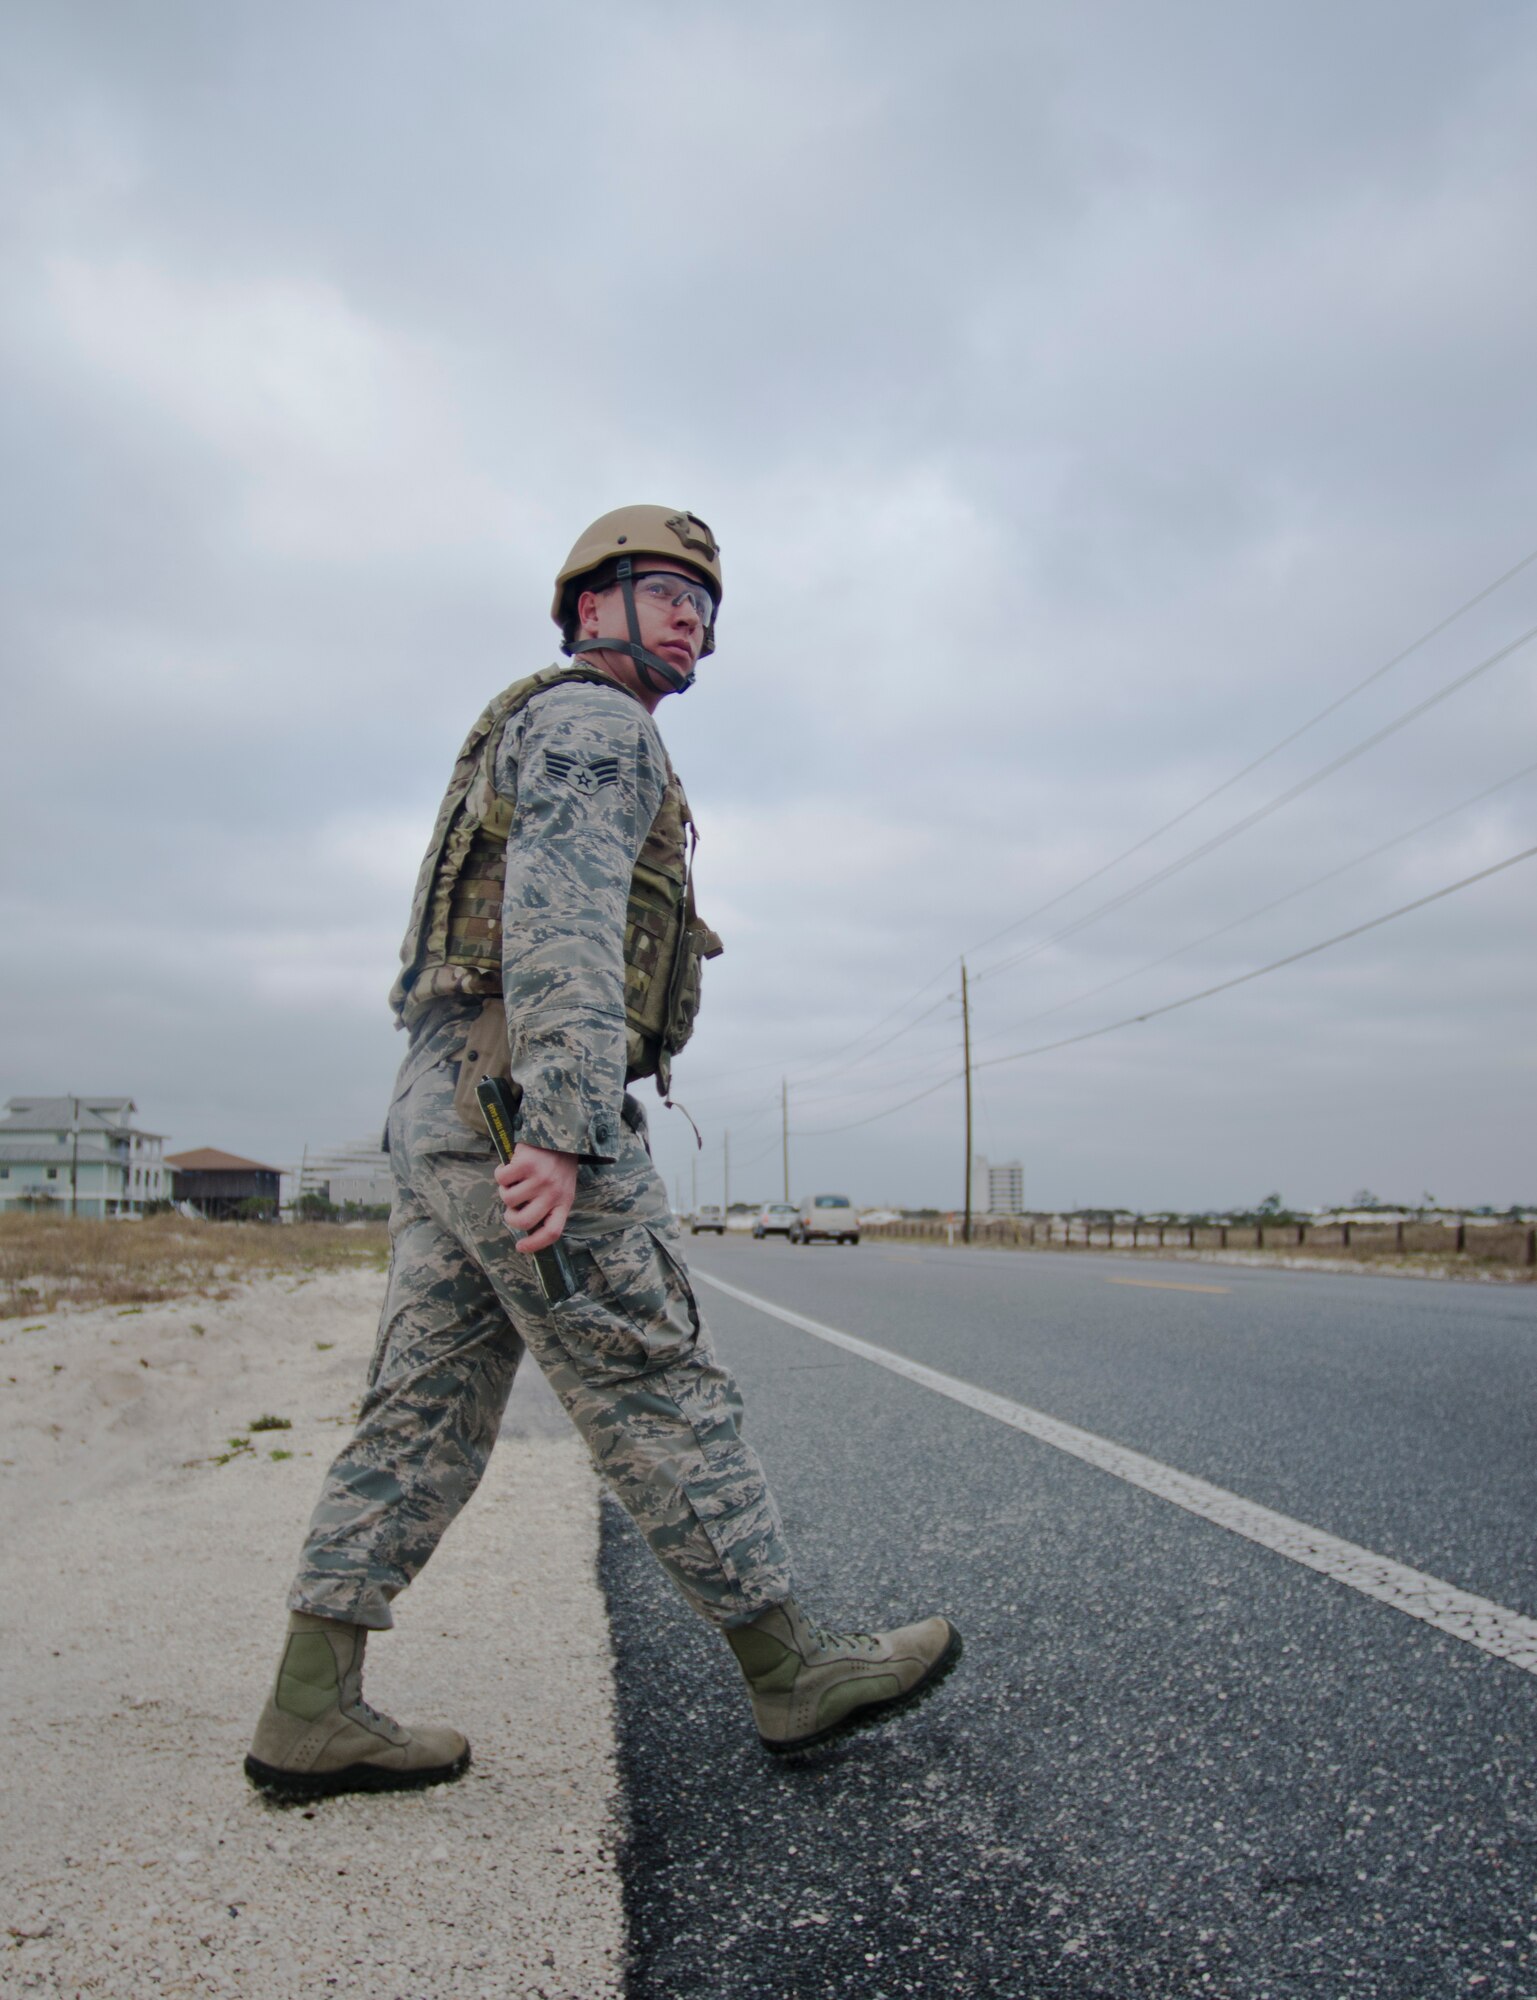 Senior Airman Christopher Dolan, 919th Special Operations Squadron explosive ordnance journeyman, crosses the street carrying a stick of C4 explosive at Perdido Key, Fla., March 12, 2014. EOD Airmen used C4 to dispose of an unexploded ordnances. (U.S. Air Force photo/Staff Sgt. John Bainter)